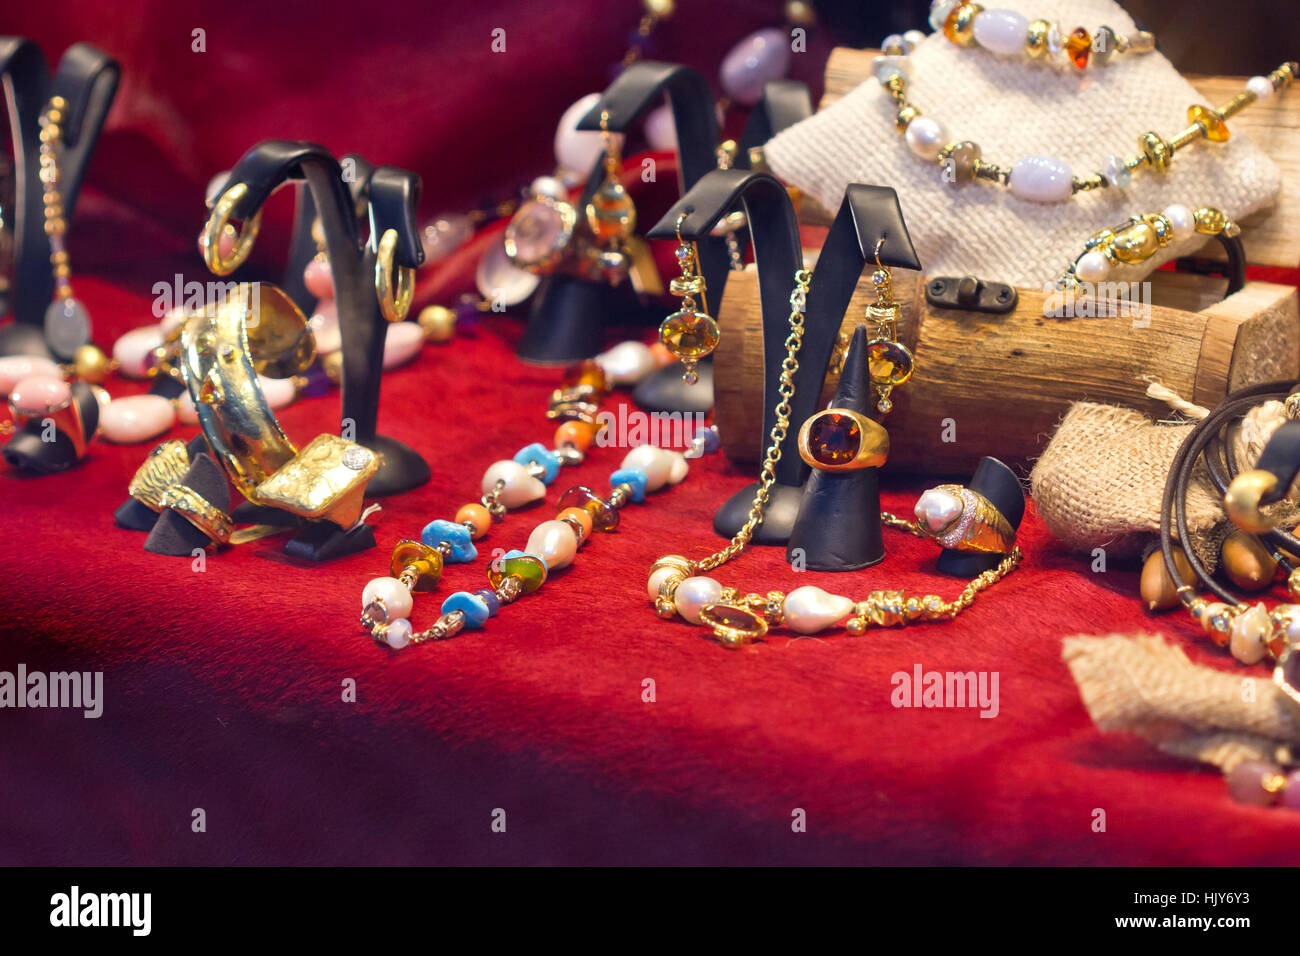 Golden jewelry on a red counter. Stock Photo